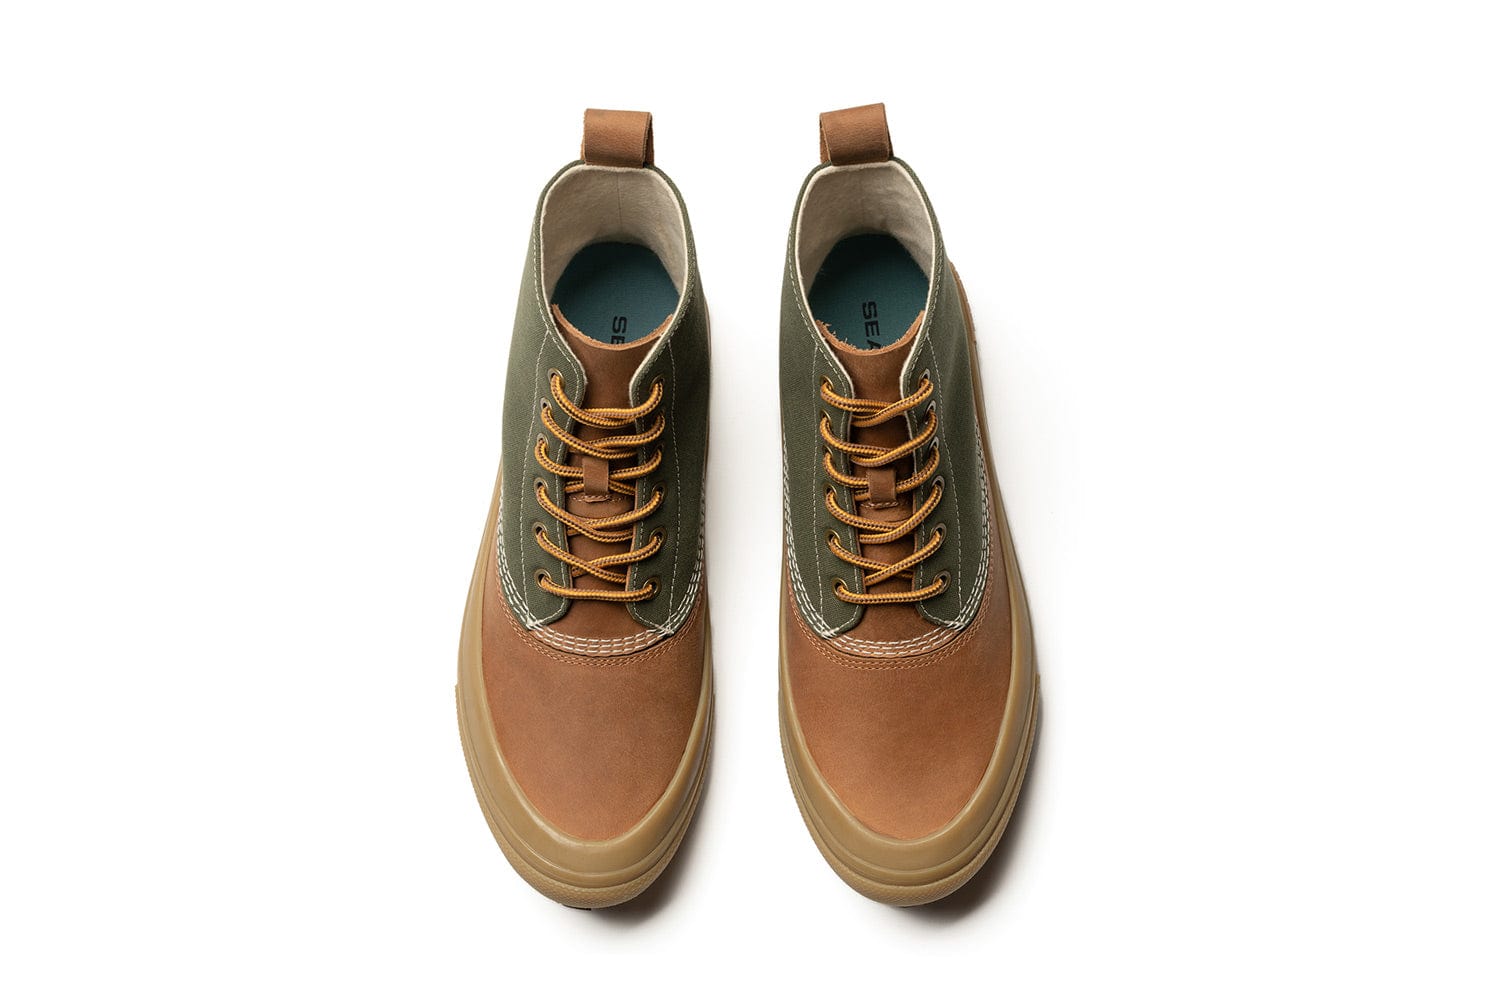 Top view of Cascade Range boots in Cashew/Olive, highlighting the contrast of olive canvas and cashew leather.